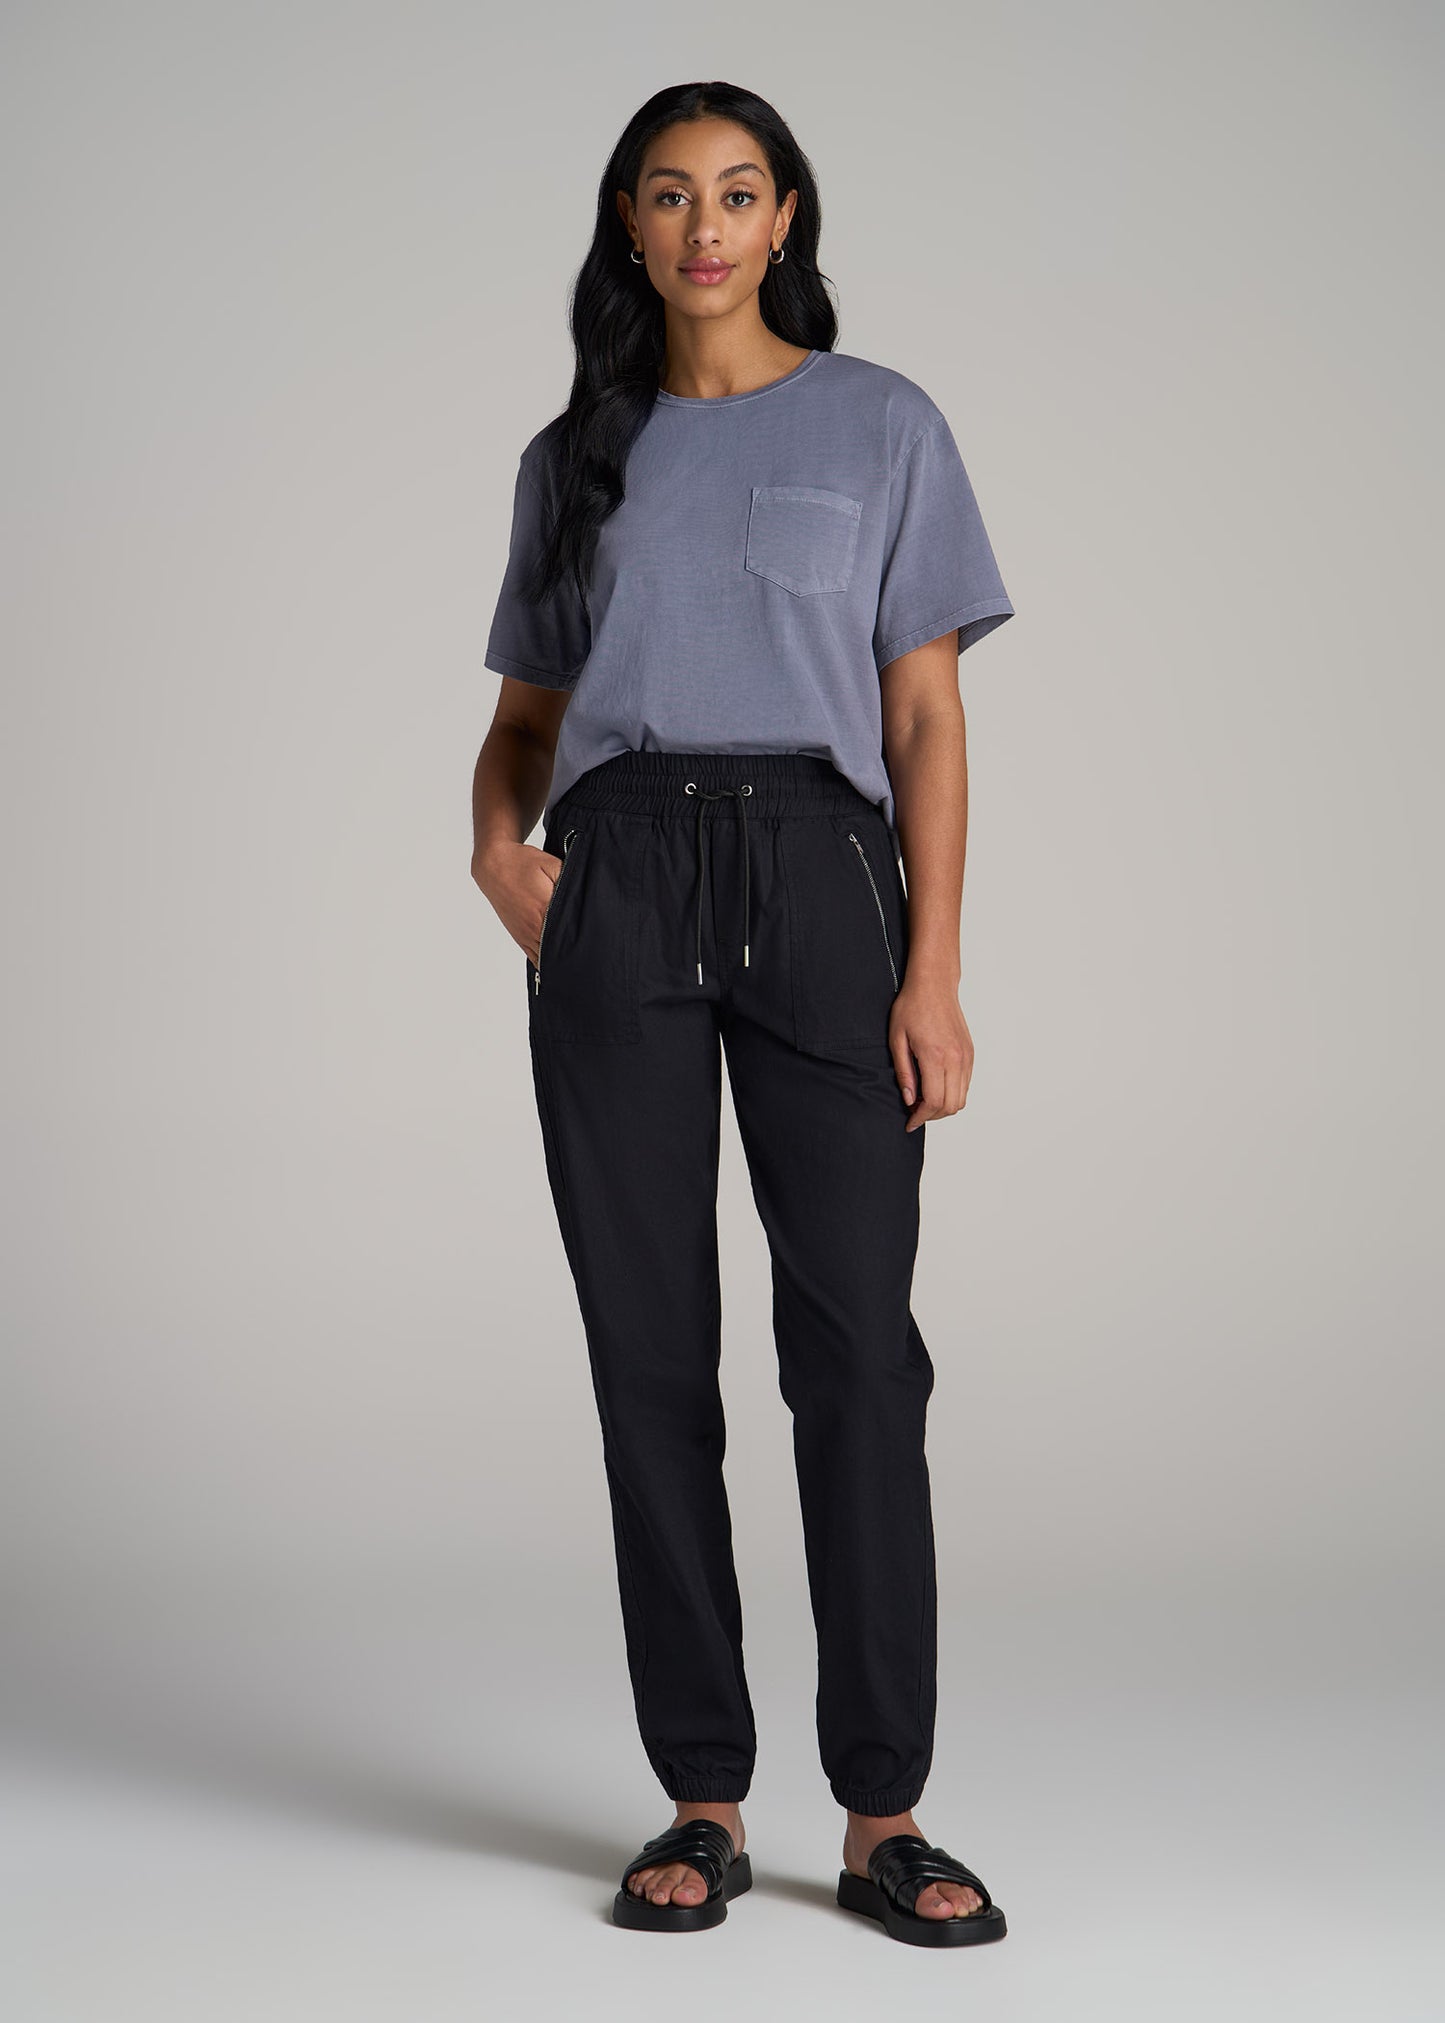 Pull-On Linen Joggers for Tall Women in Black